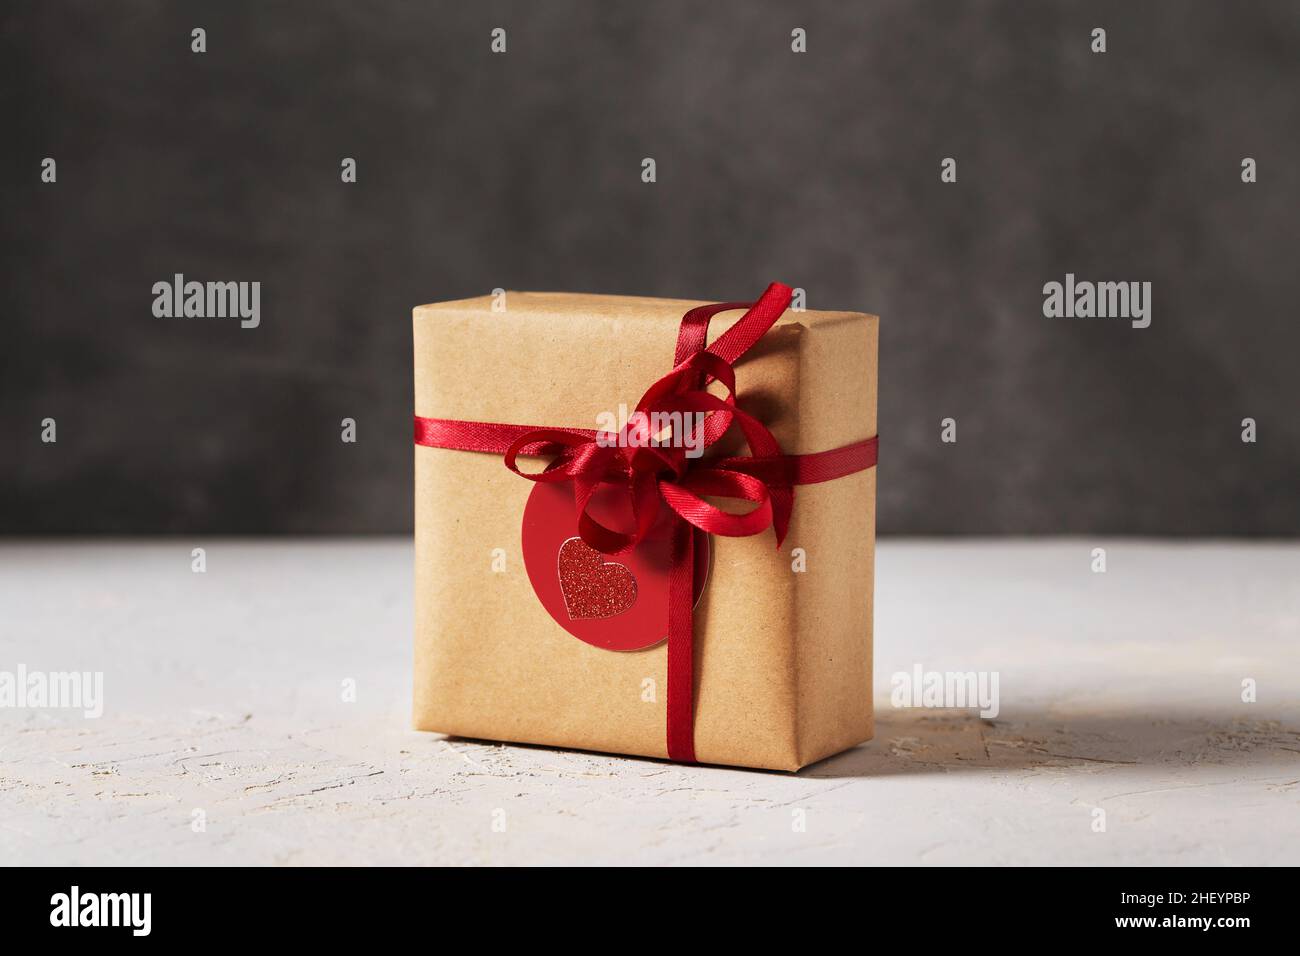 Valentines day present gift box wrapped in brown craft paper with red ribbon and red tag, side view Stock Photo